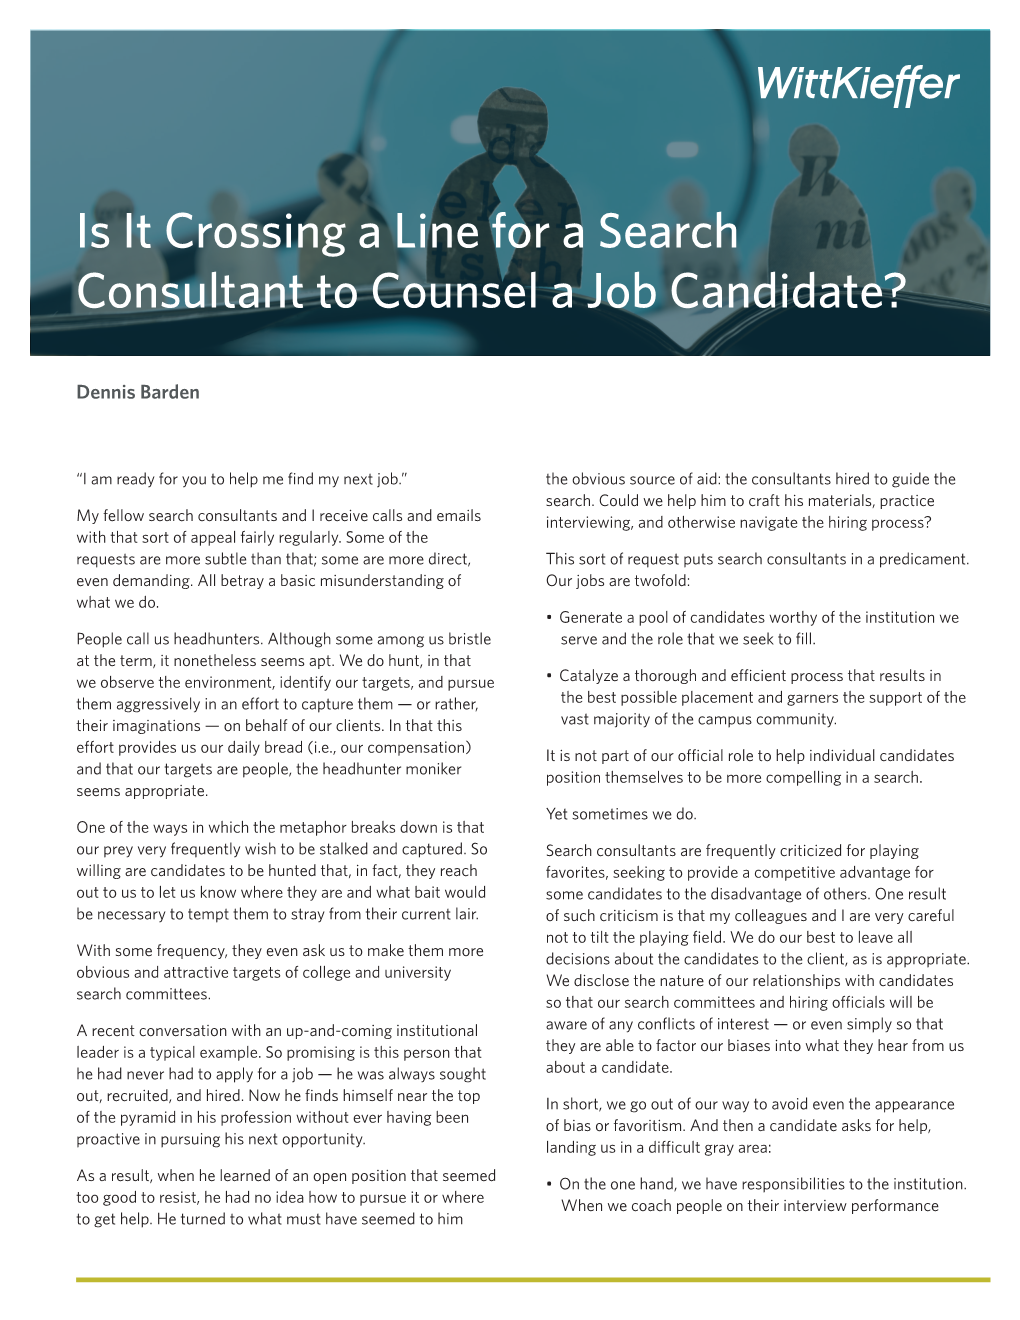 Is It Crossing a Line for a Search Consultant to Counsel a Job Candidate?